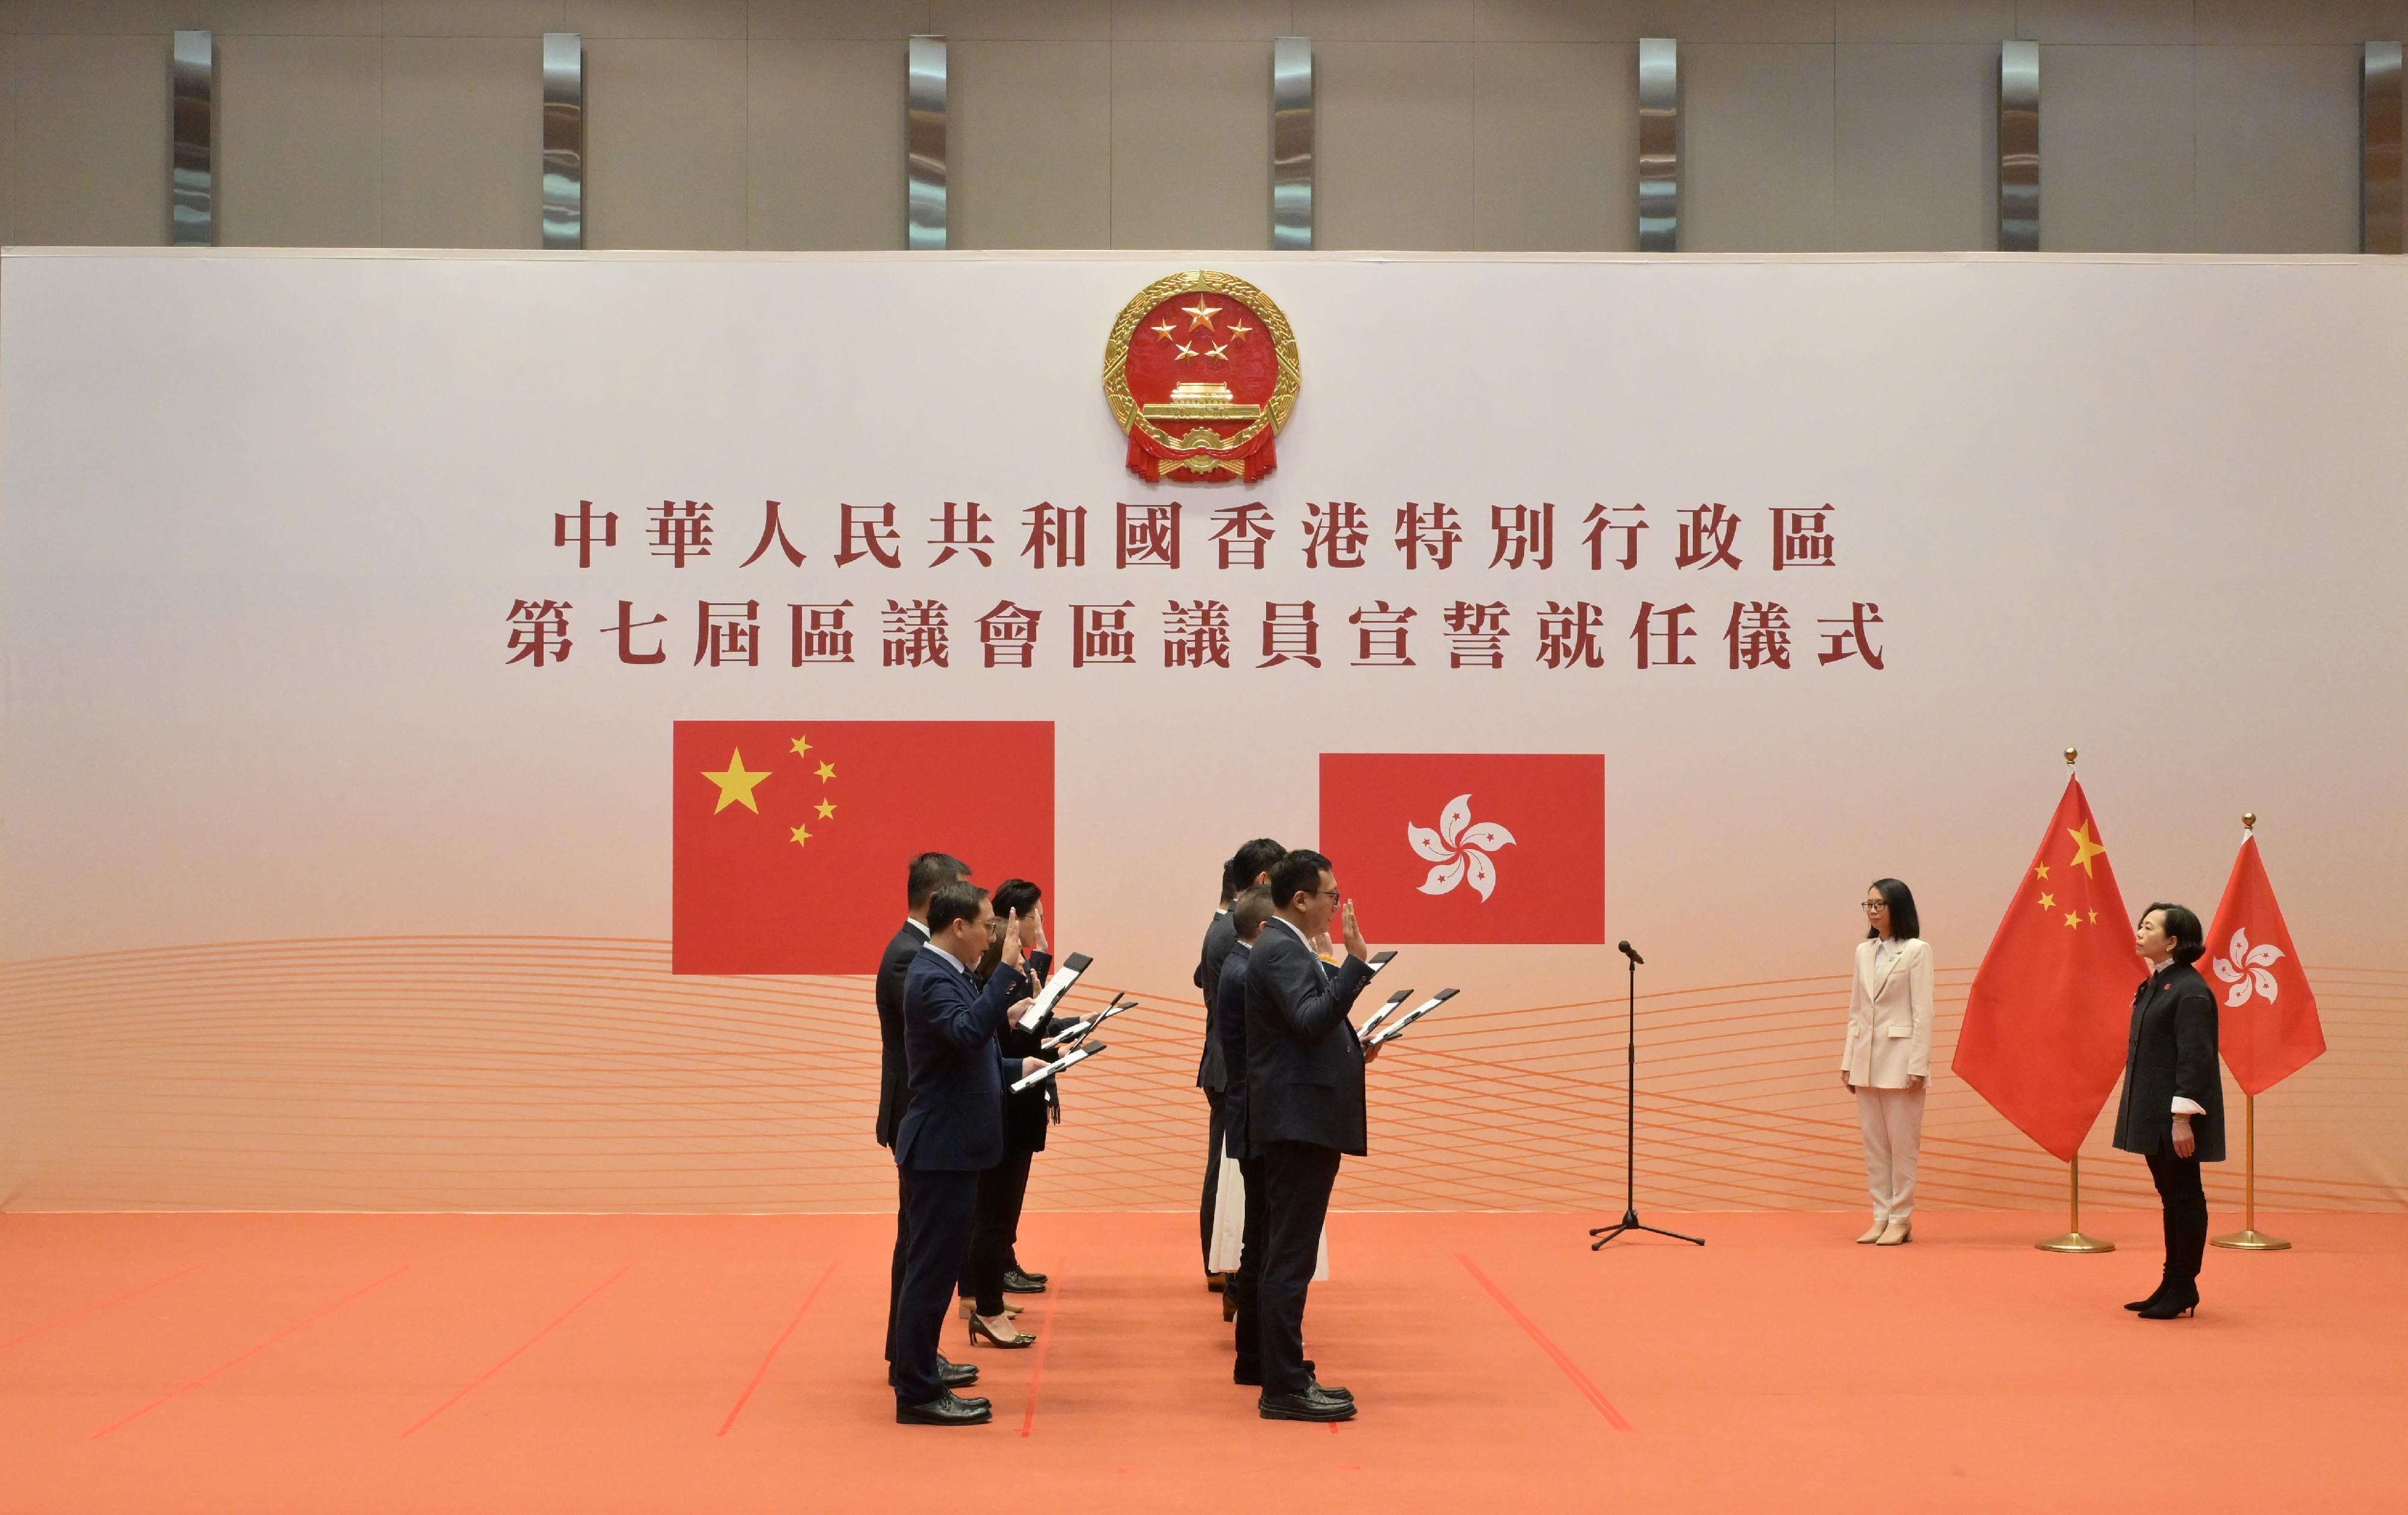 The Government held the oath-taking ceremony for members of the seventh term District Councils (DCs) at the Conference Hall of the Central Government Offices today (January 1). Photo shows the Secretary for Home and Youth Affairs, Miss Alice Mak (first right), being the oath administrator authorised by the Chief Executive, administering the oath-taking by DC members from Wan Chai District at the ceremony.